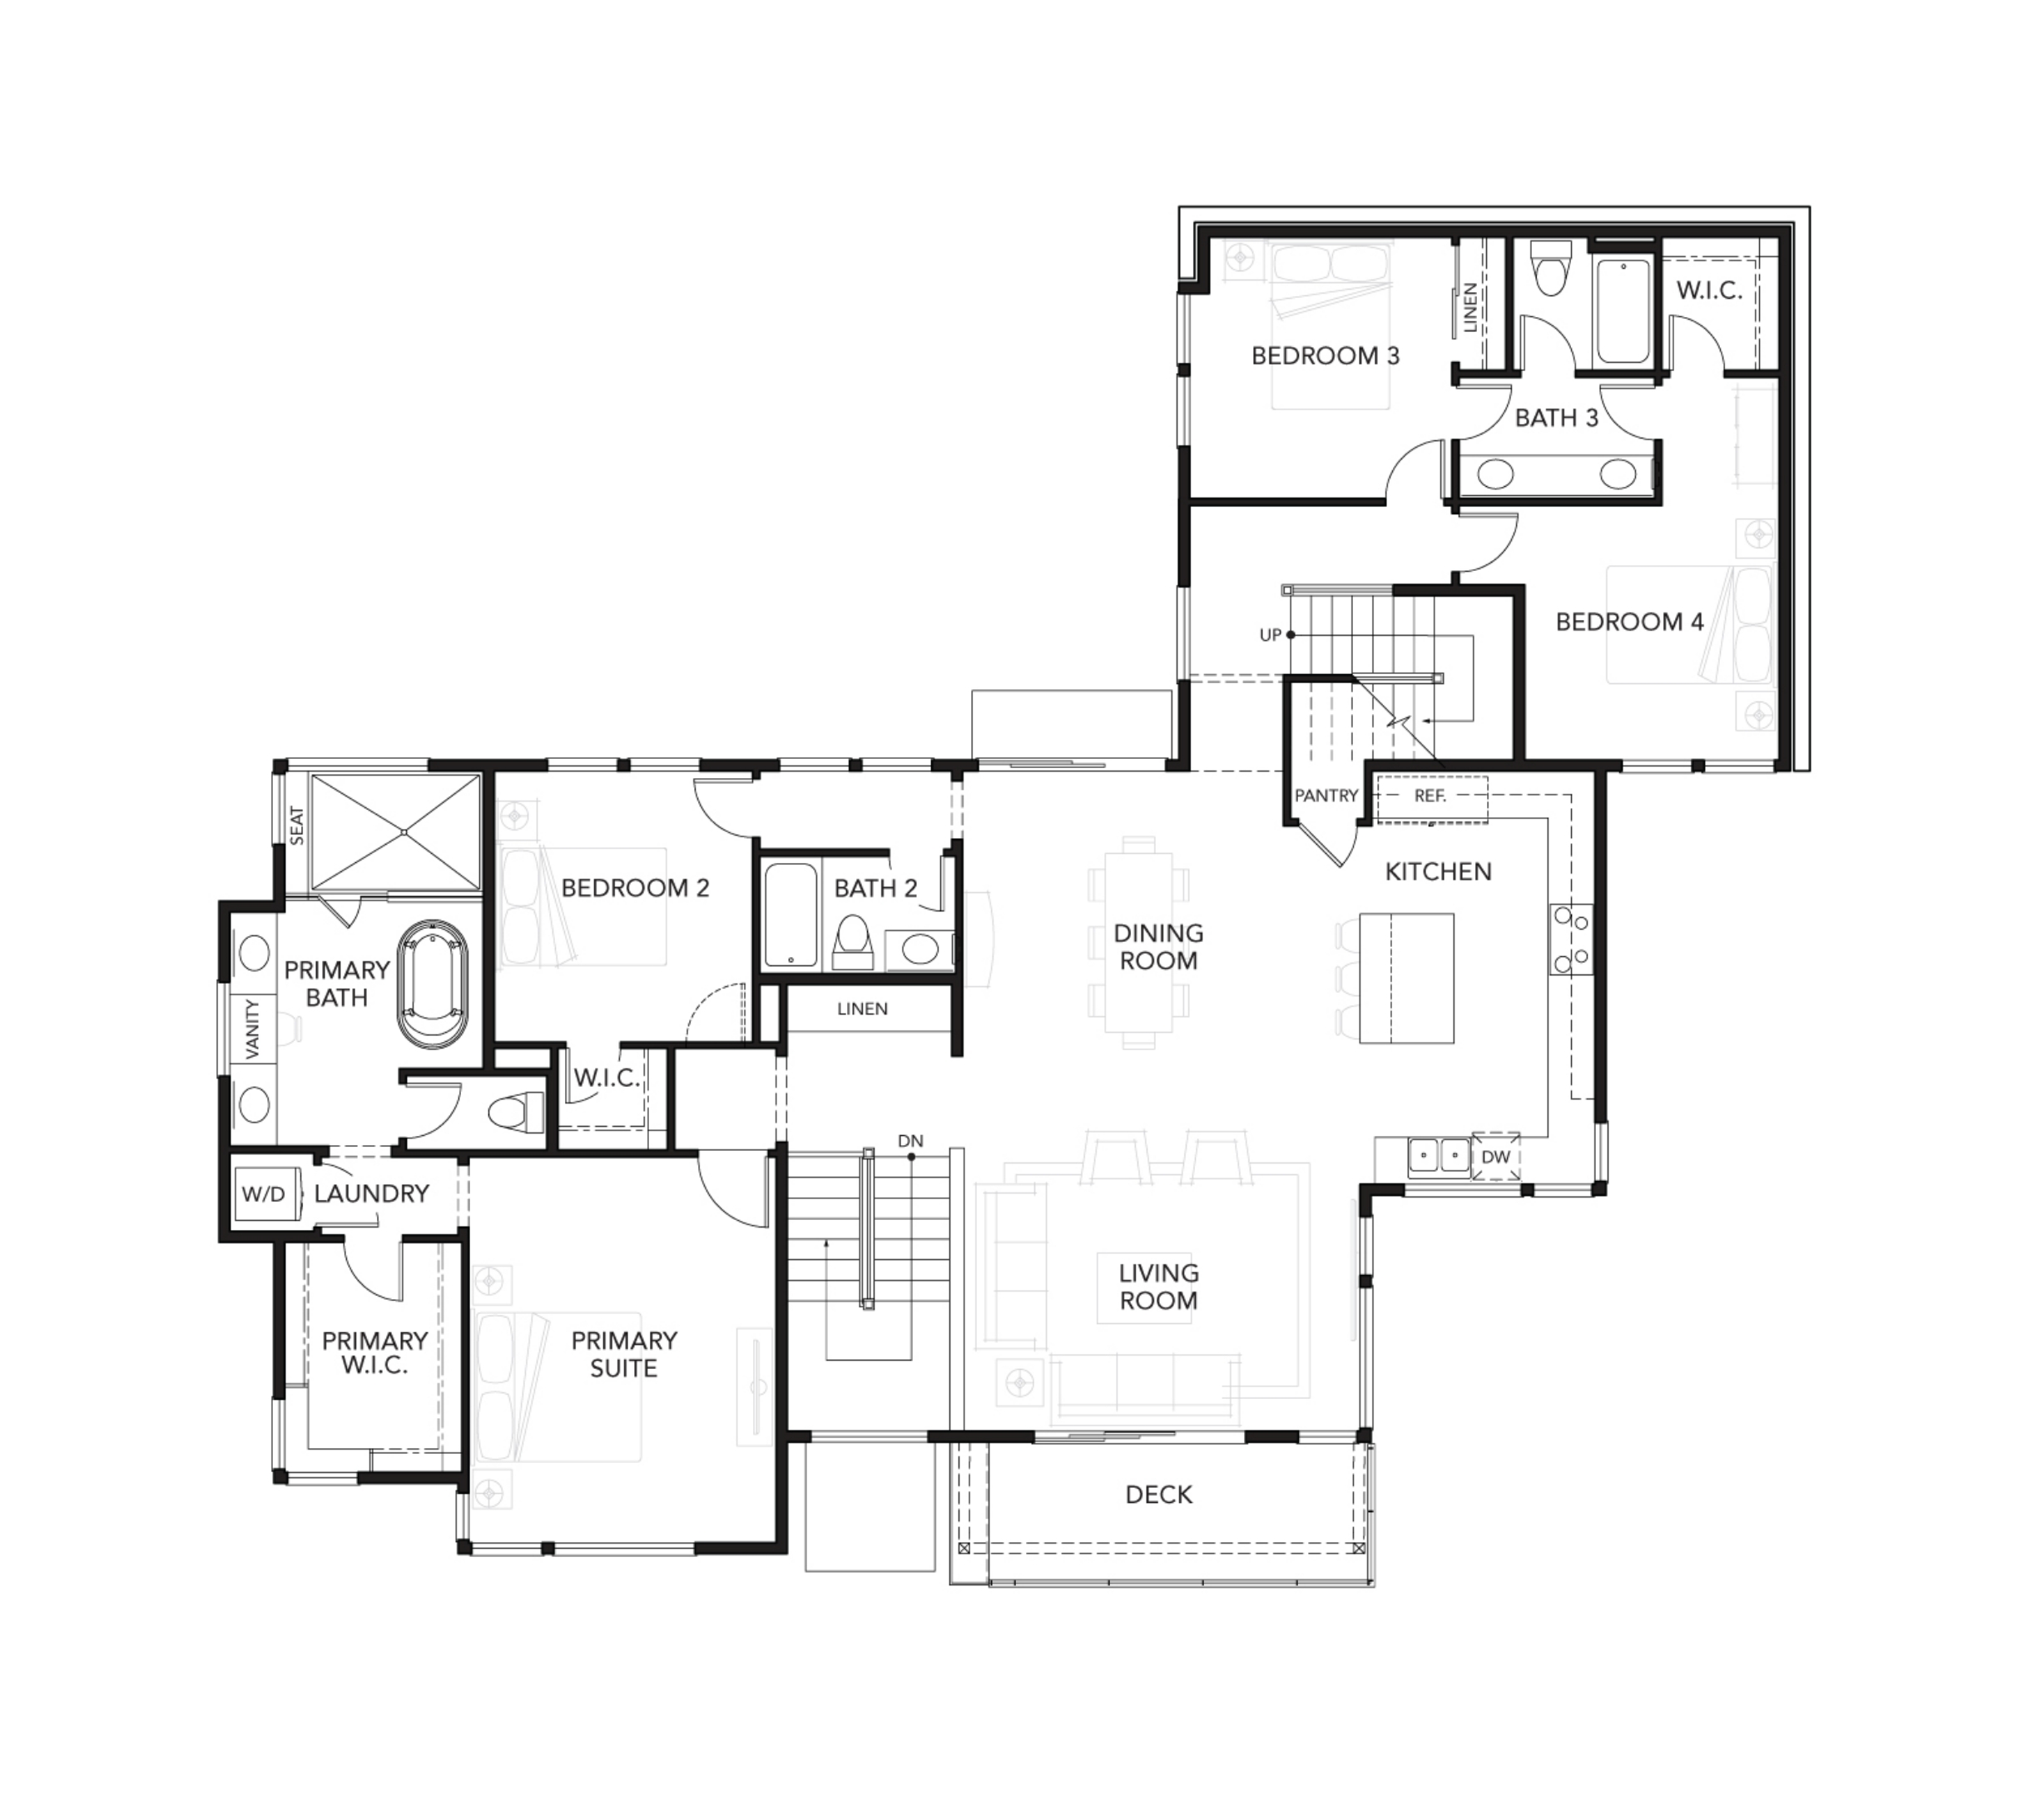 Haven Development's second floor Plan for elevation 3A of the Legacy at Lucas Valley new home development in Marin County, CA